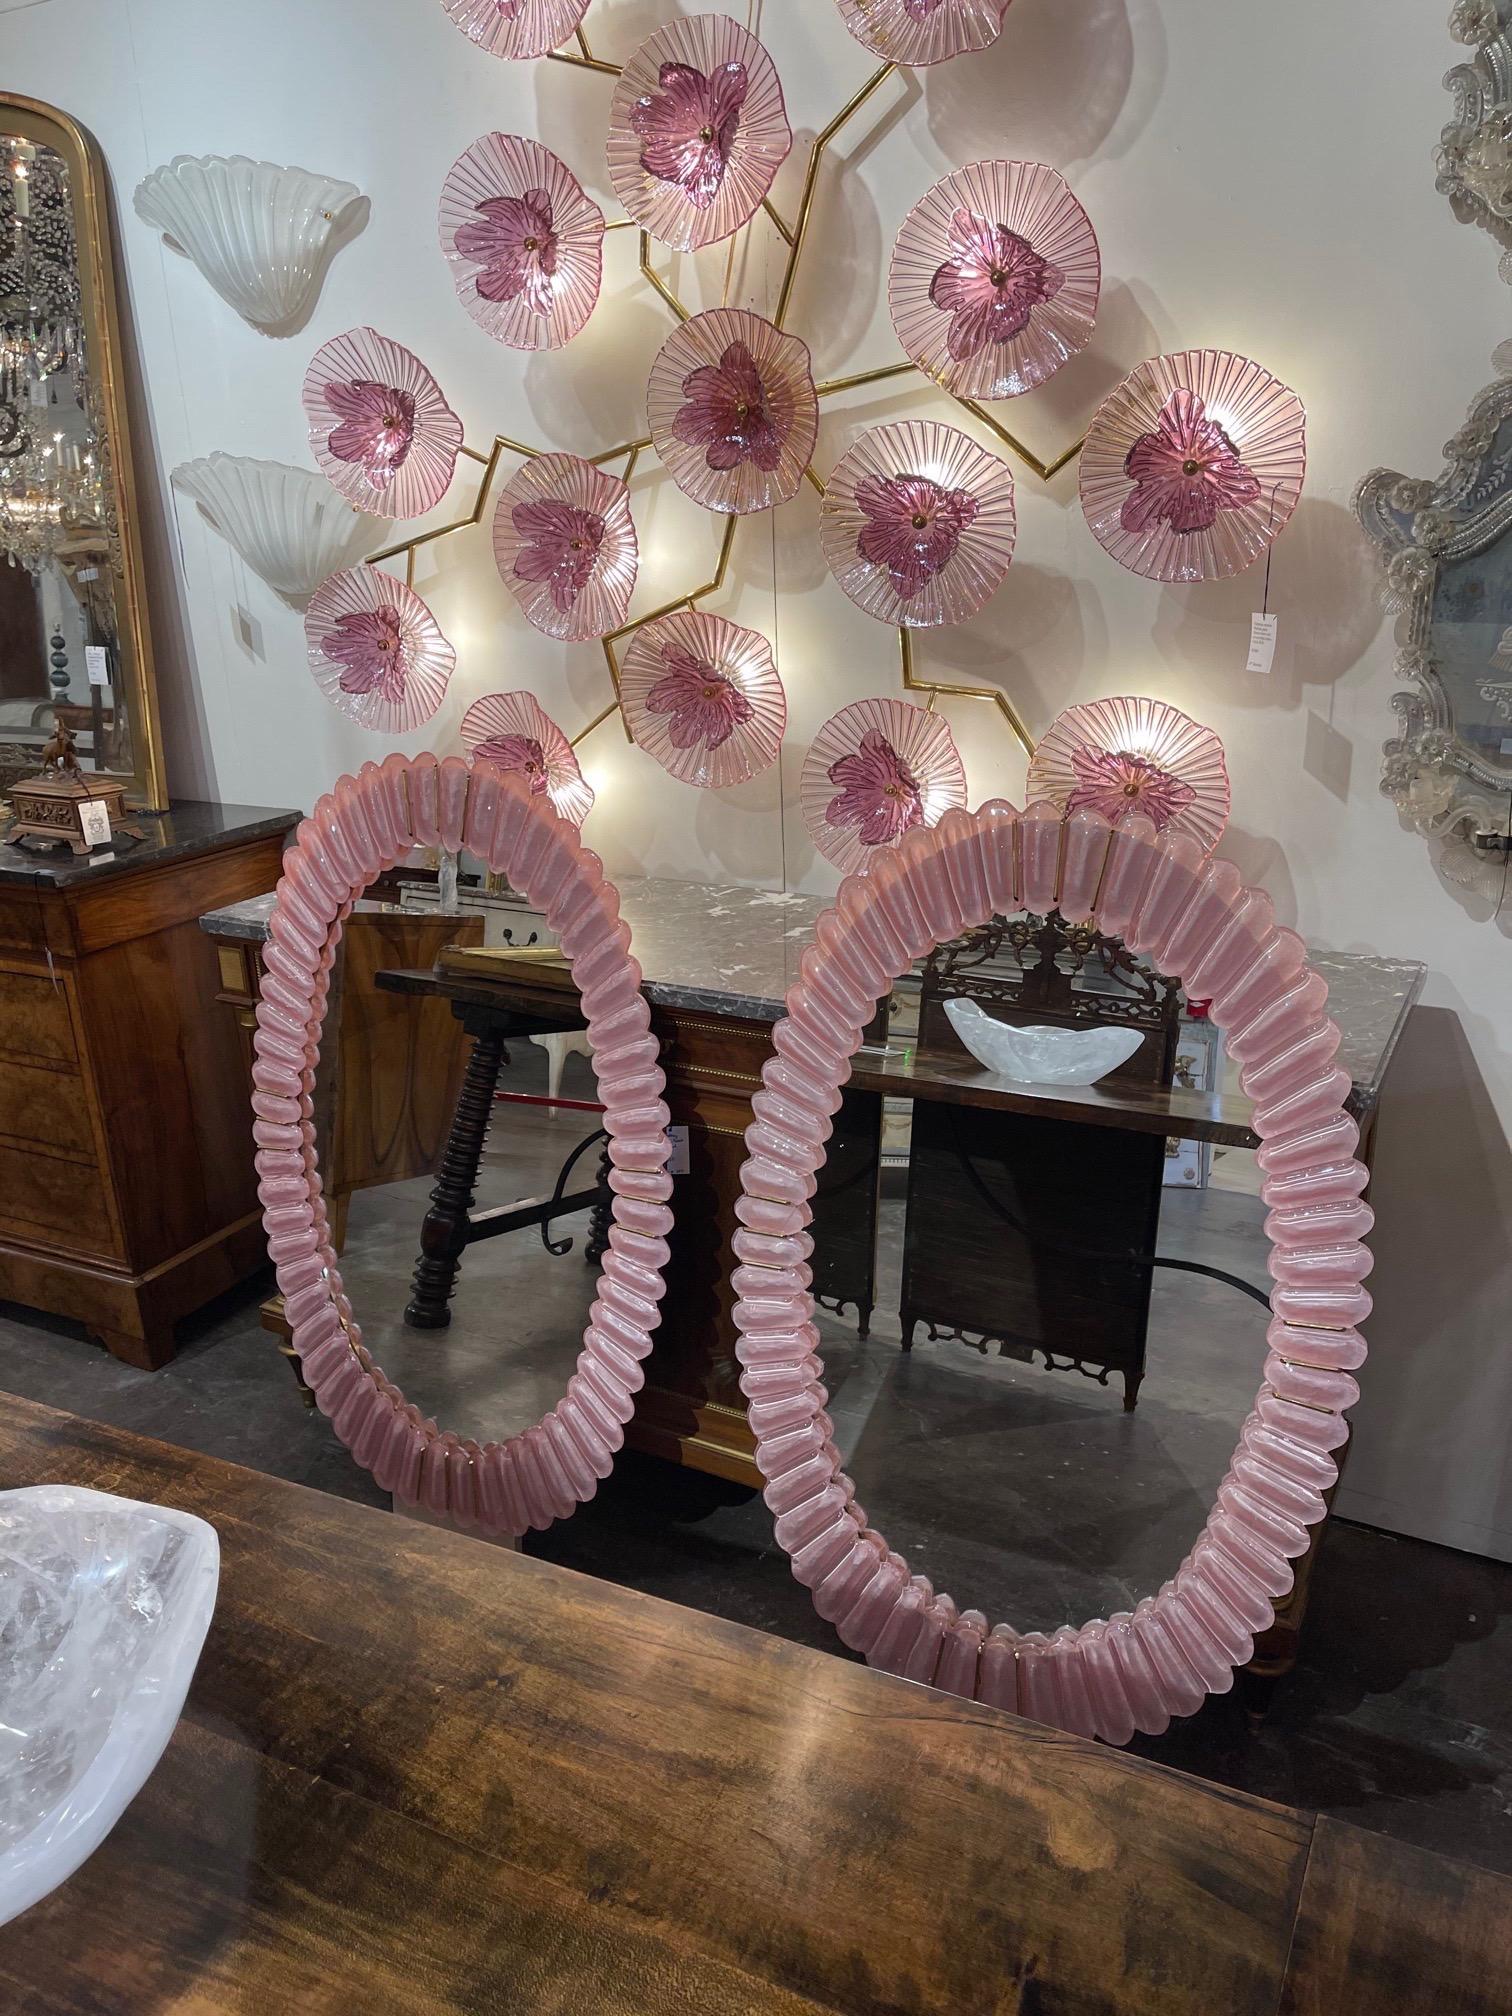 Fabulous oval shaped pink Murano glass mirrors. Gorgeous pink glass with brass accents. An amazing decorative accent!! Note: Price listed is per item.